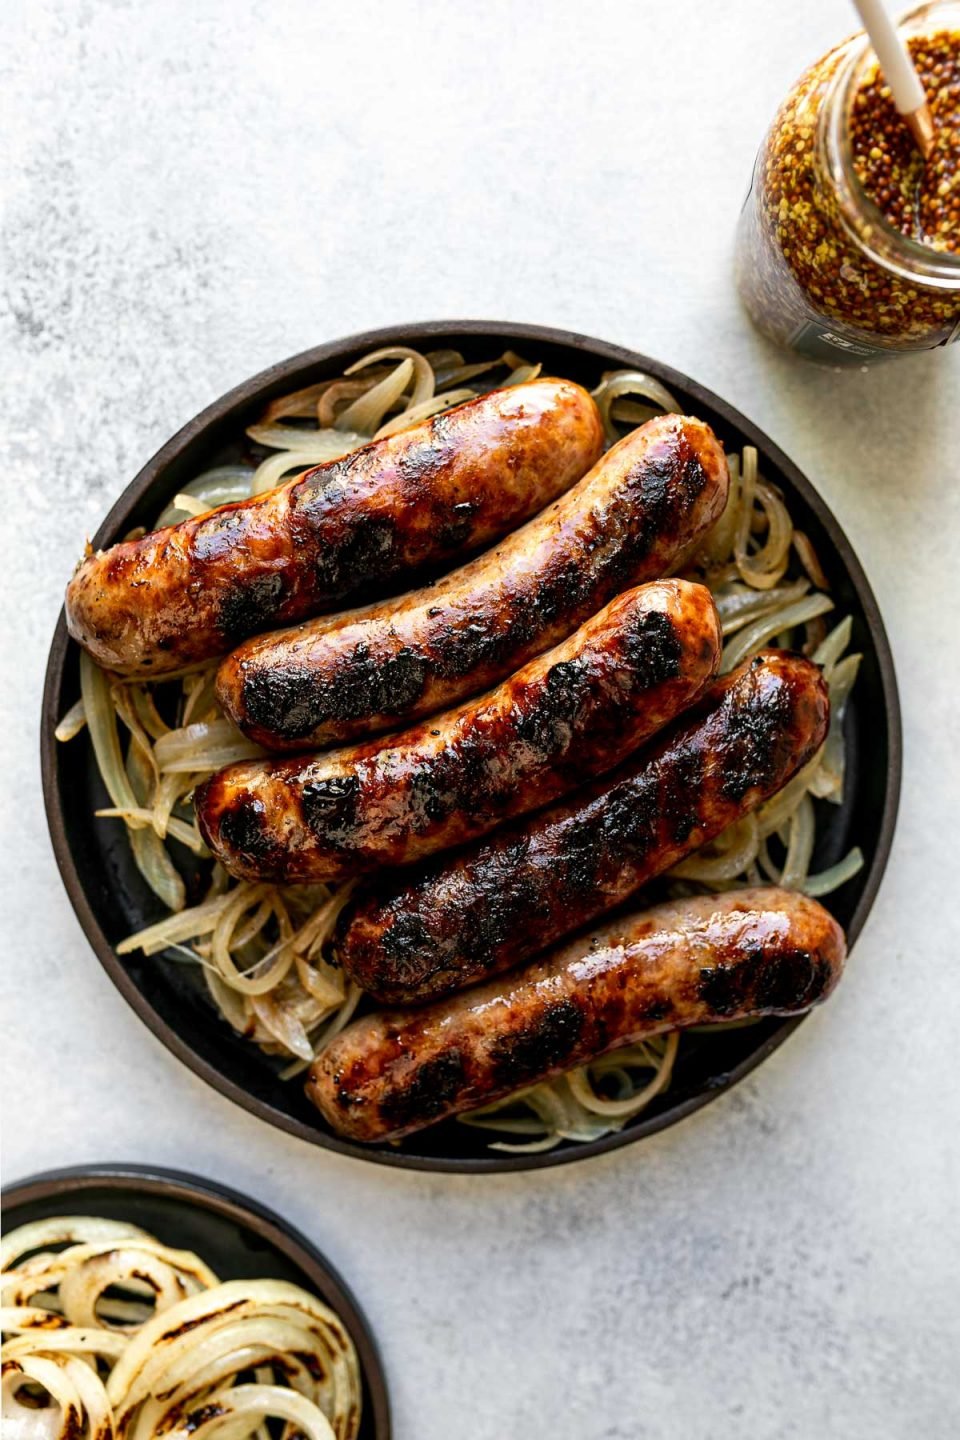 Grilled beer brats sit atop beer braised onions on a black plate. The plate sits atop a light blue surface, next to a small black plate topped with grilled onions & a jar of whole grain mustard.